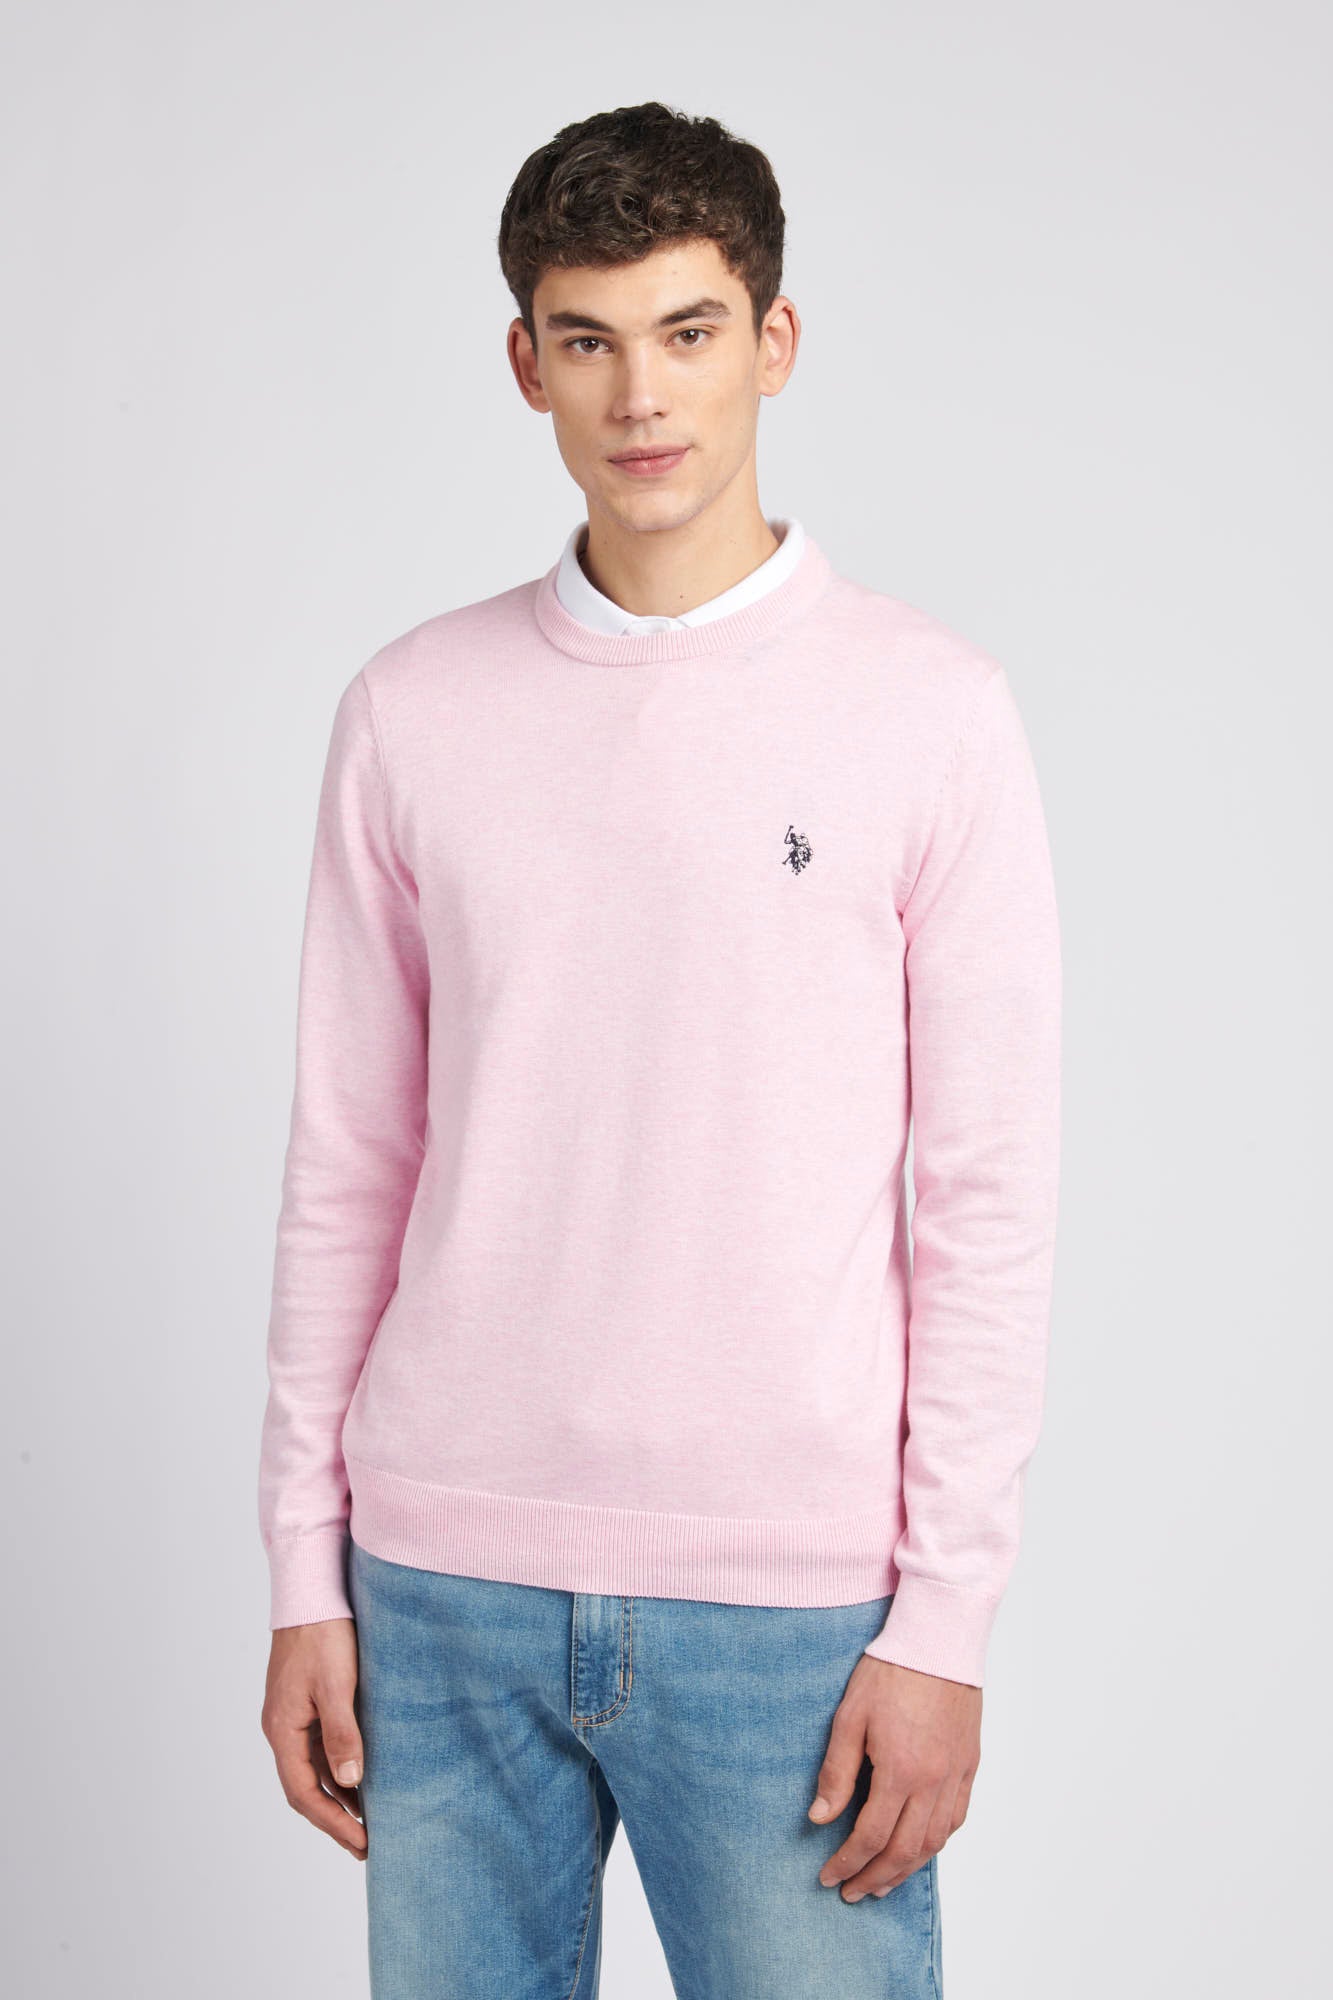 U.S. Polo Assn. Mens Crew Neck Knitted Jumper in Orchid Pink Marl – U.S.  Polo Assn. UK